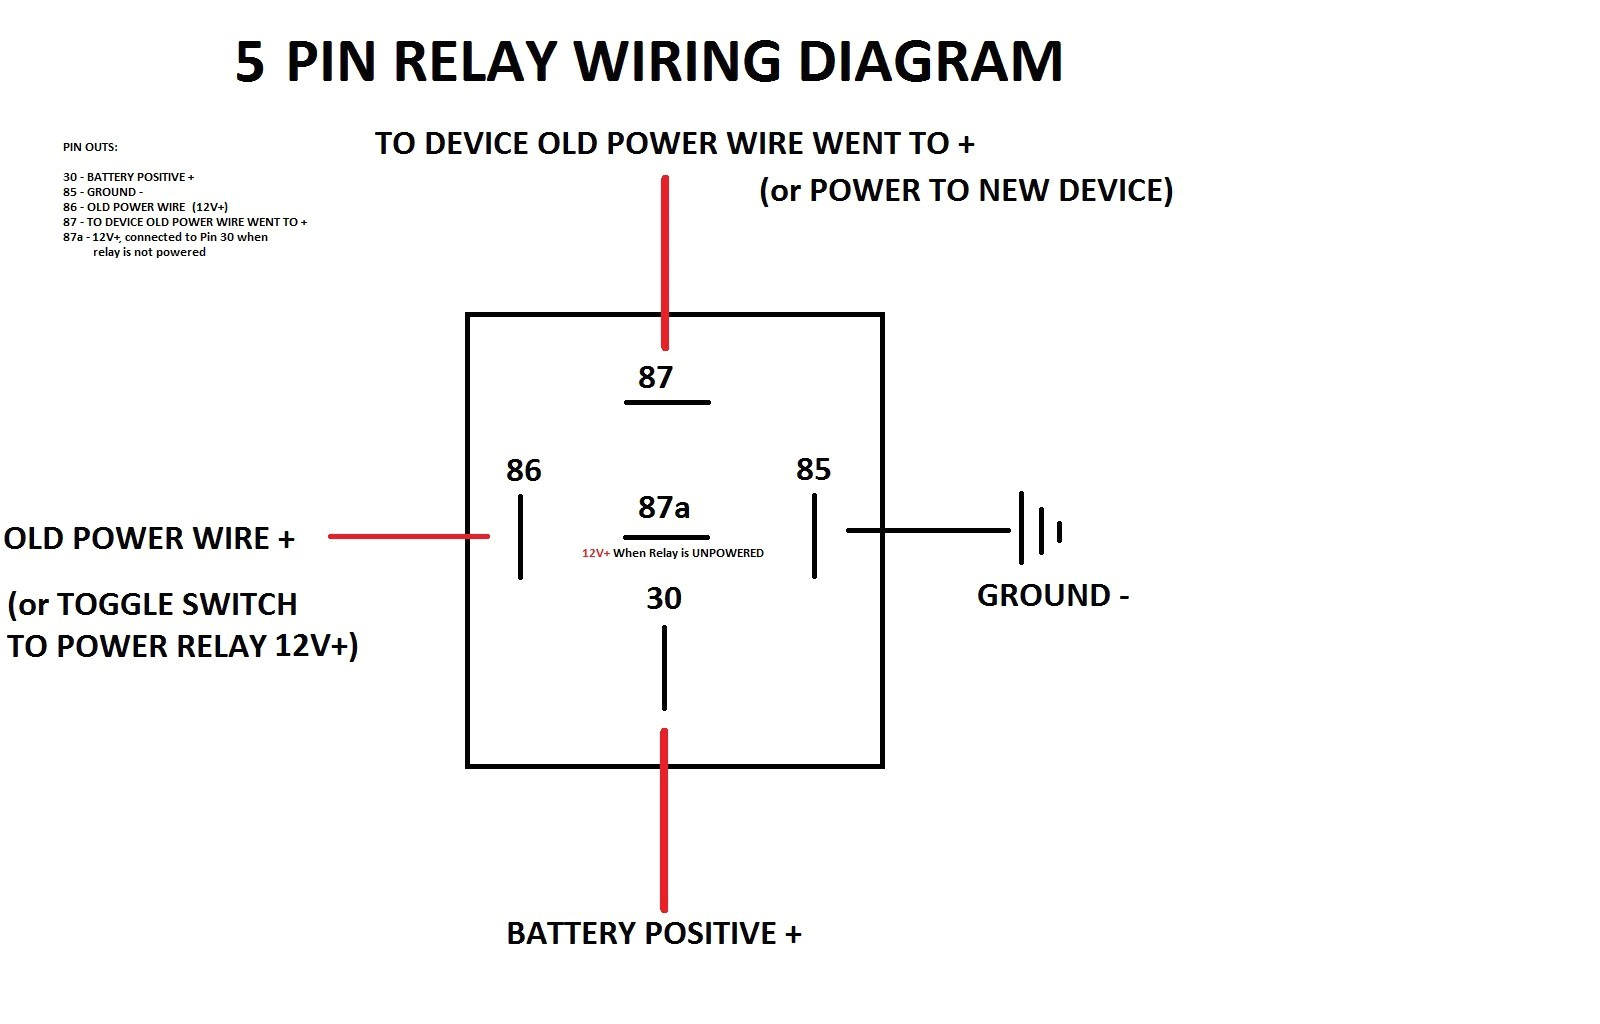 4 wire relay wiring diagram wiring diagram technic4 wire relay diagram wiring diagram technic4 wire relay